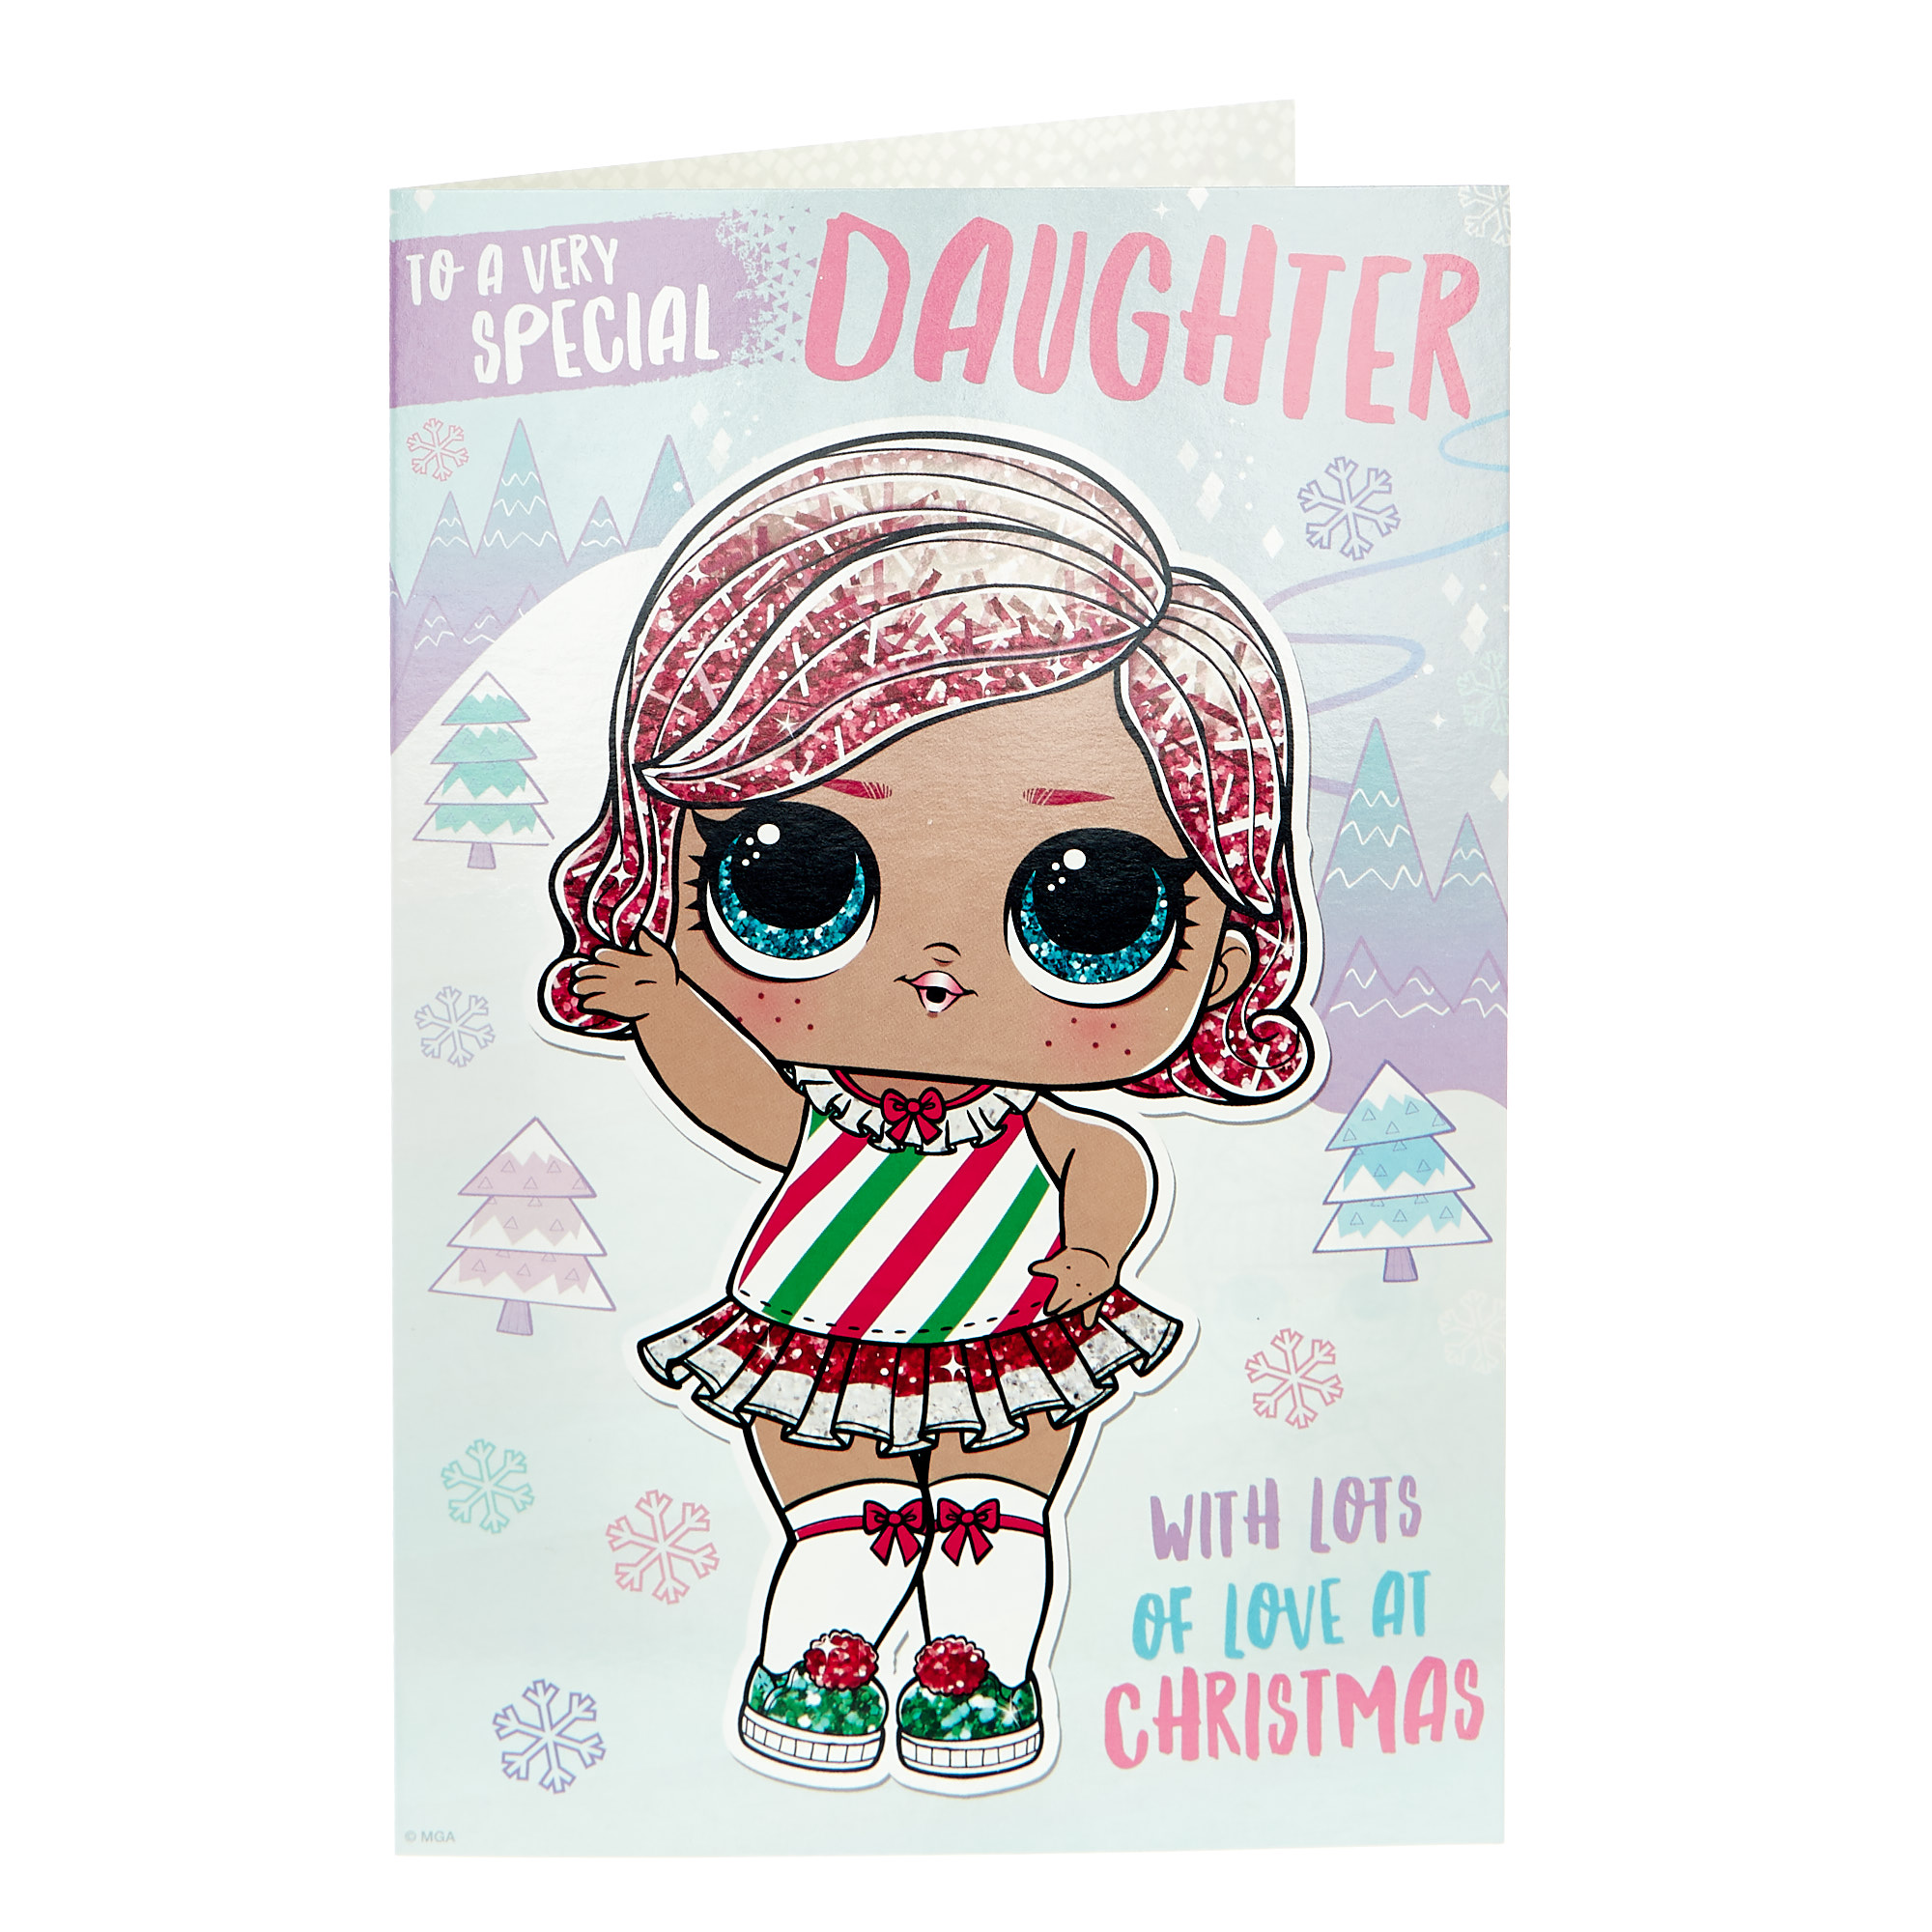 L.O.L. Surprise! Christmas Card - Special Daughter 